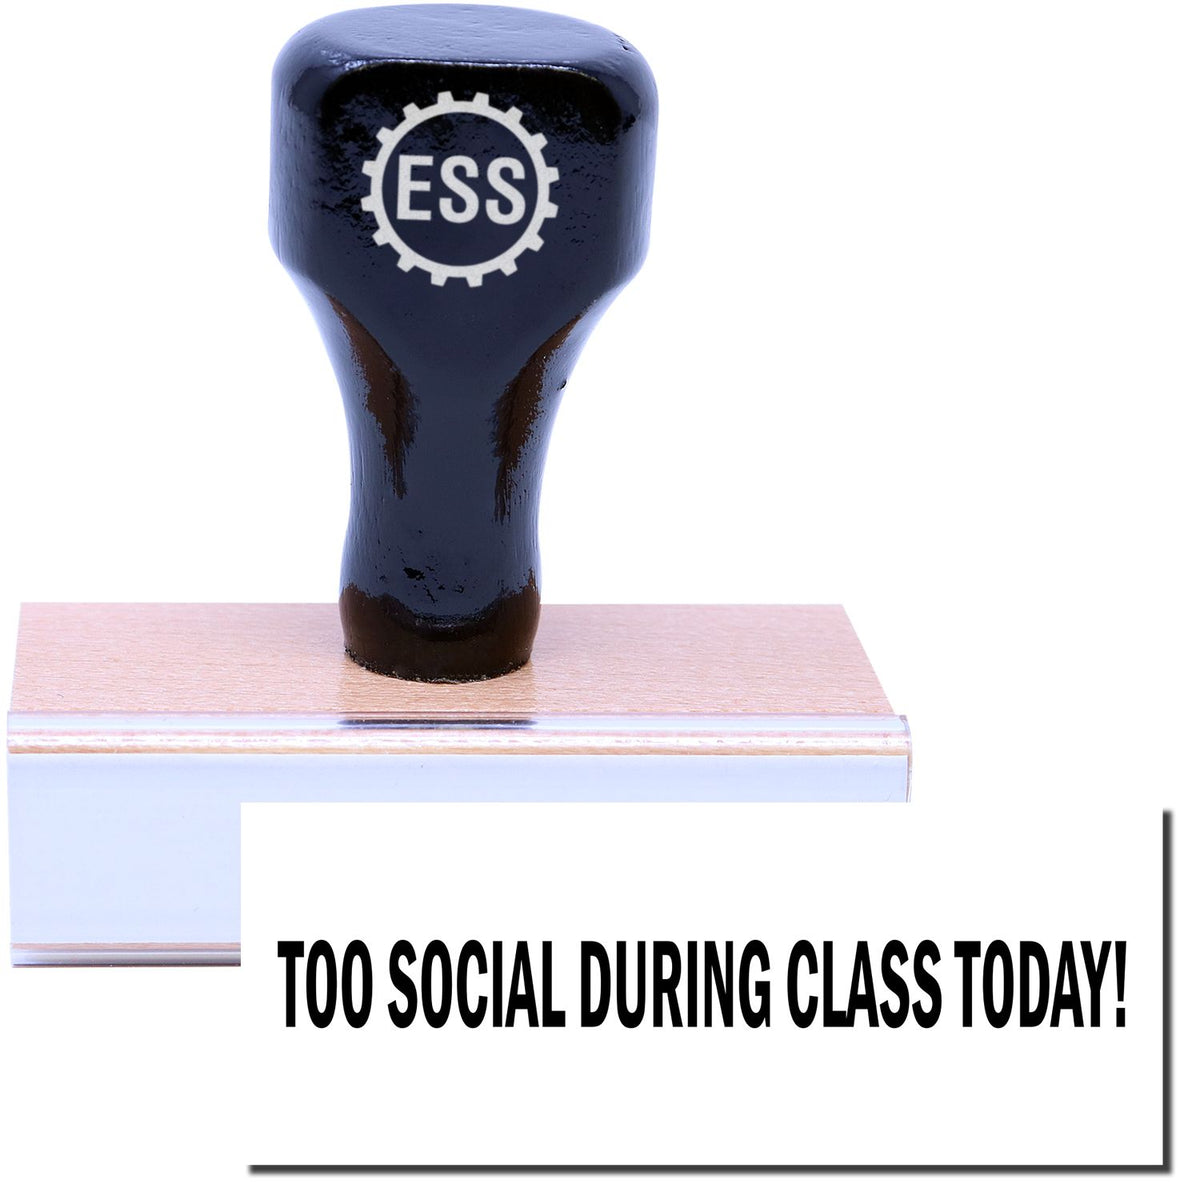 A stock office rubber stamp with a stamped image showing how the text &quot;TOO SOCIAL DURING CLASS TODAY!&quot; in a large font is displayed after stamping.